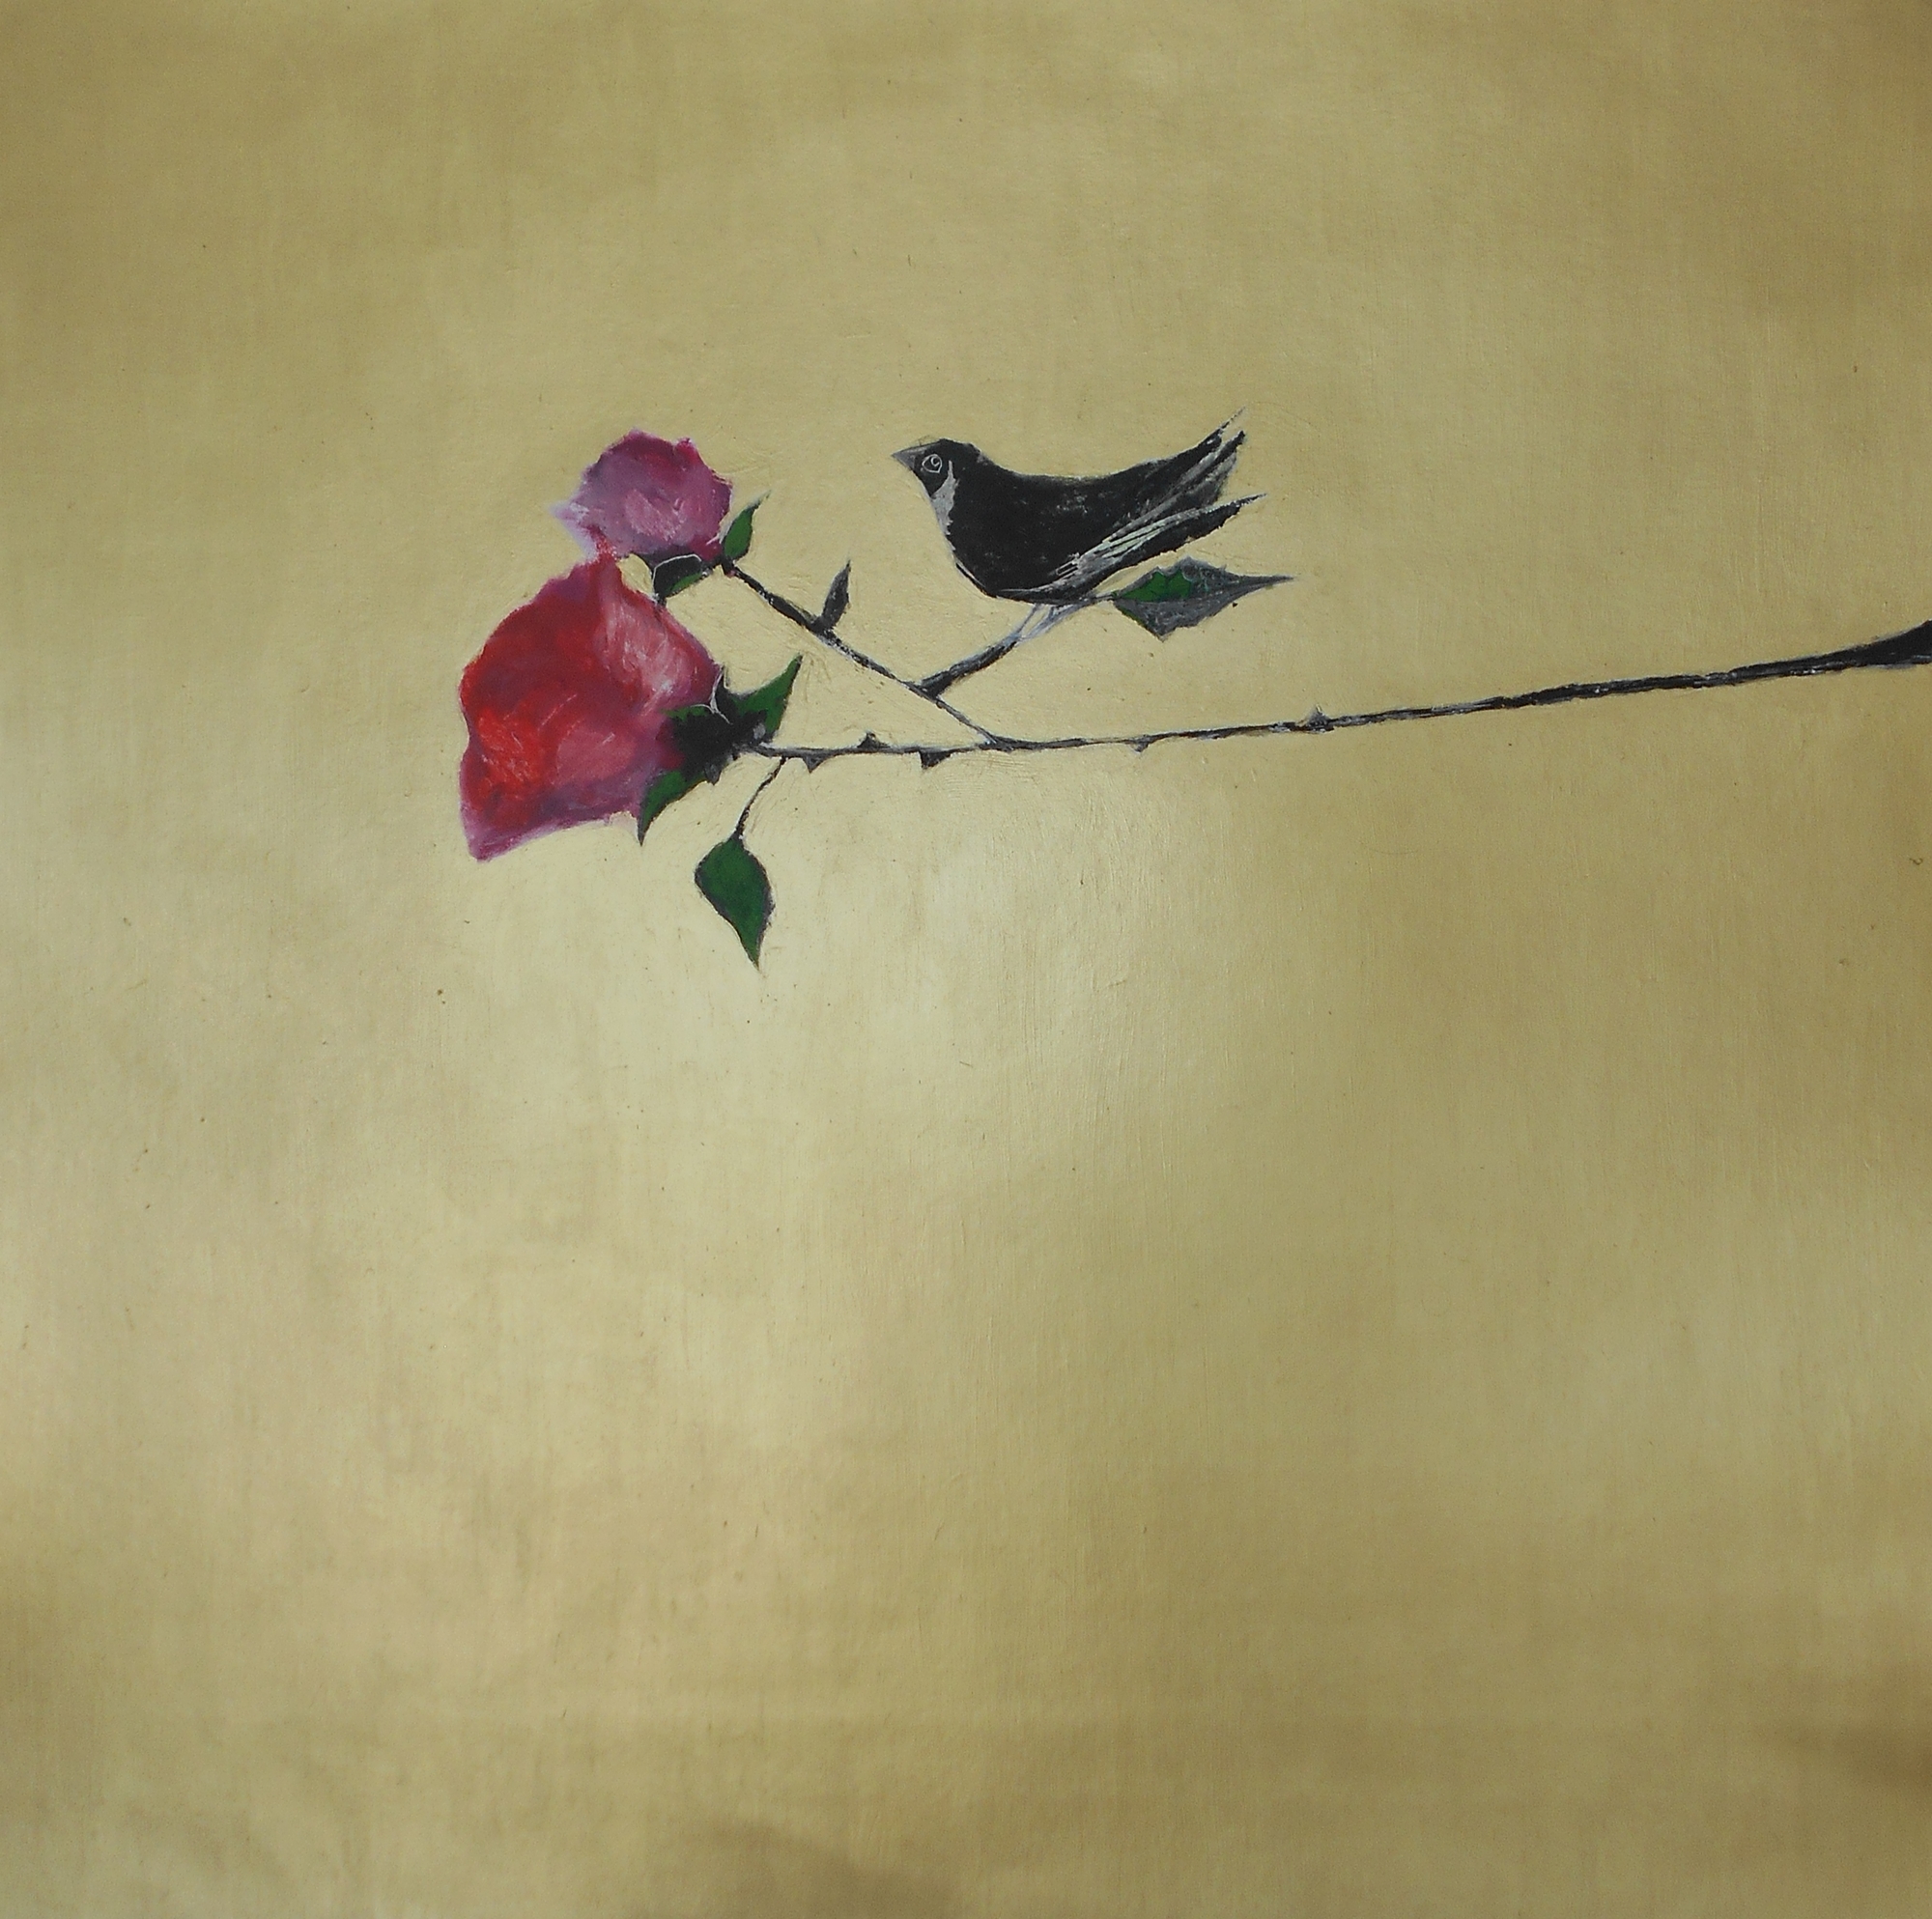 21.The bird and the rose, 70x70cm, mixed media on paper, 2019